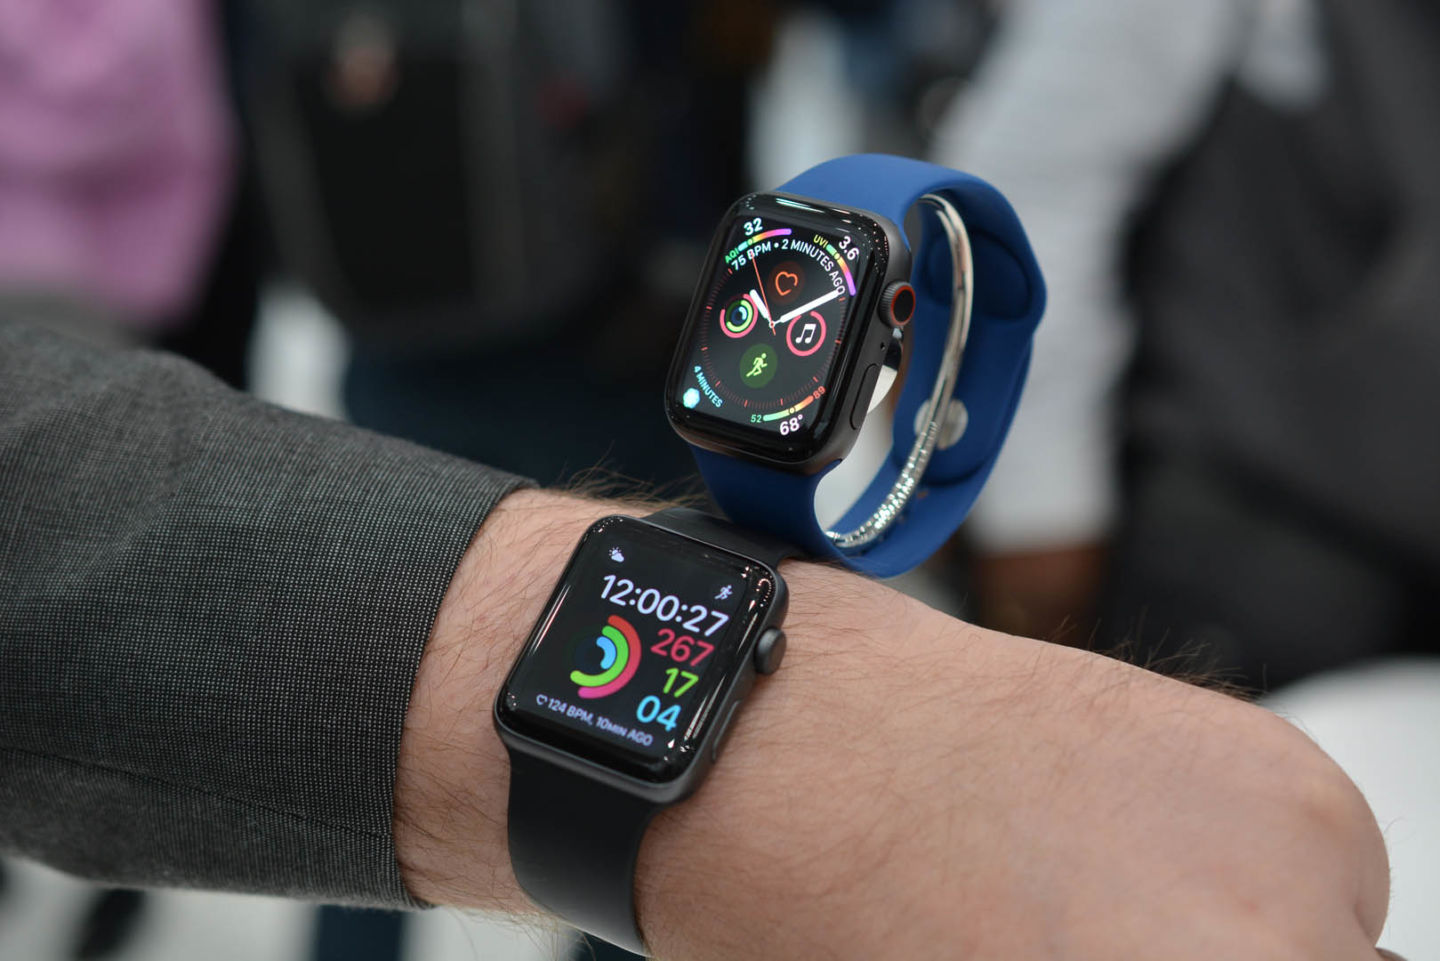 Apple Watch Series 4 hands on Sparking envy in current Apple Watch owners2018/19 By PakUrduWorld